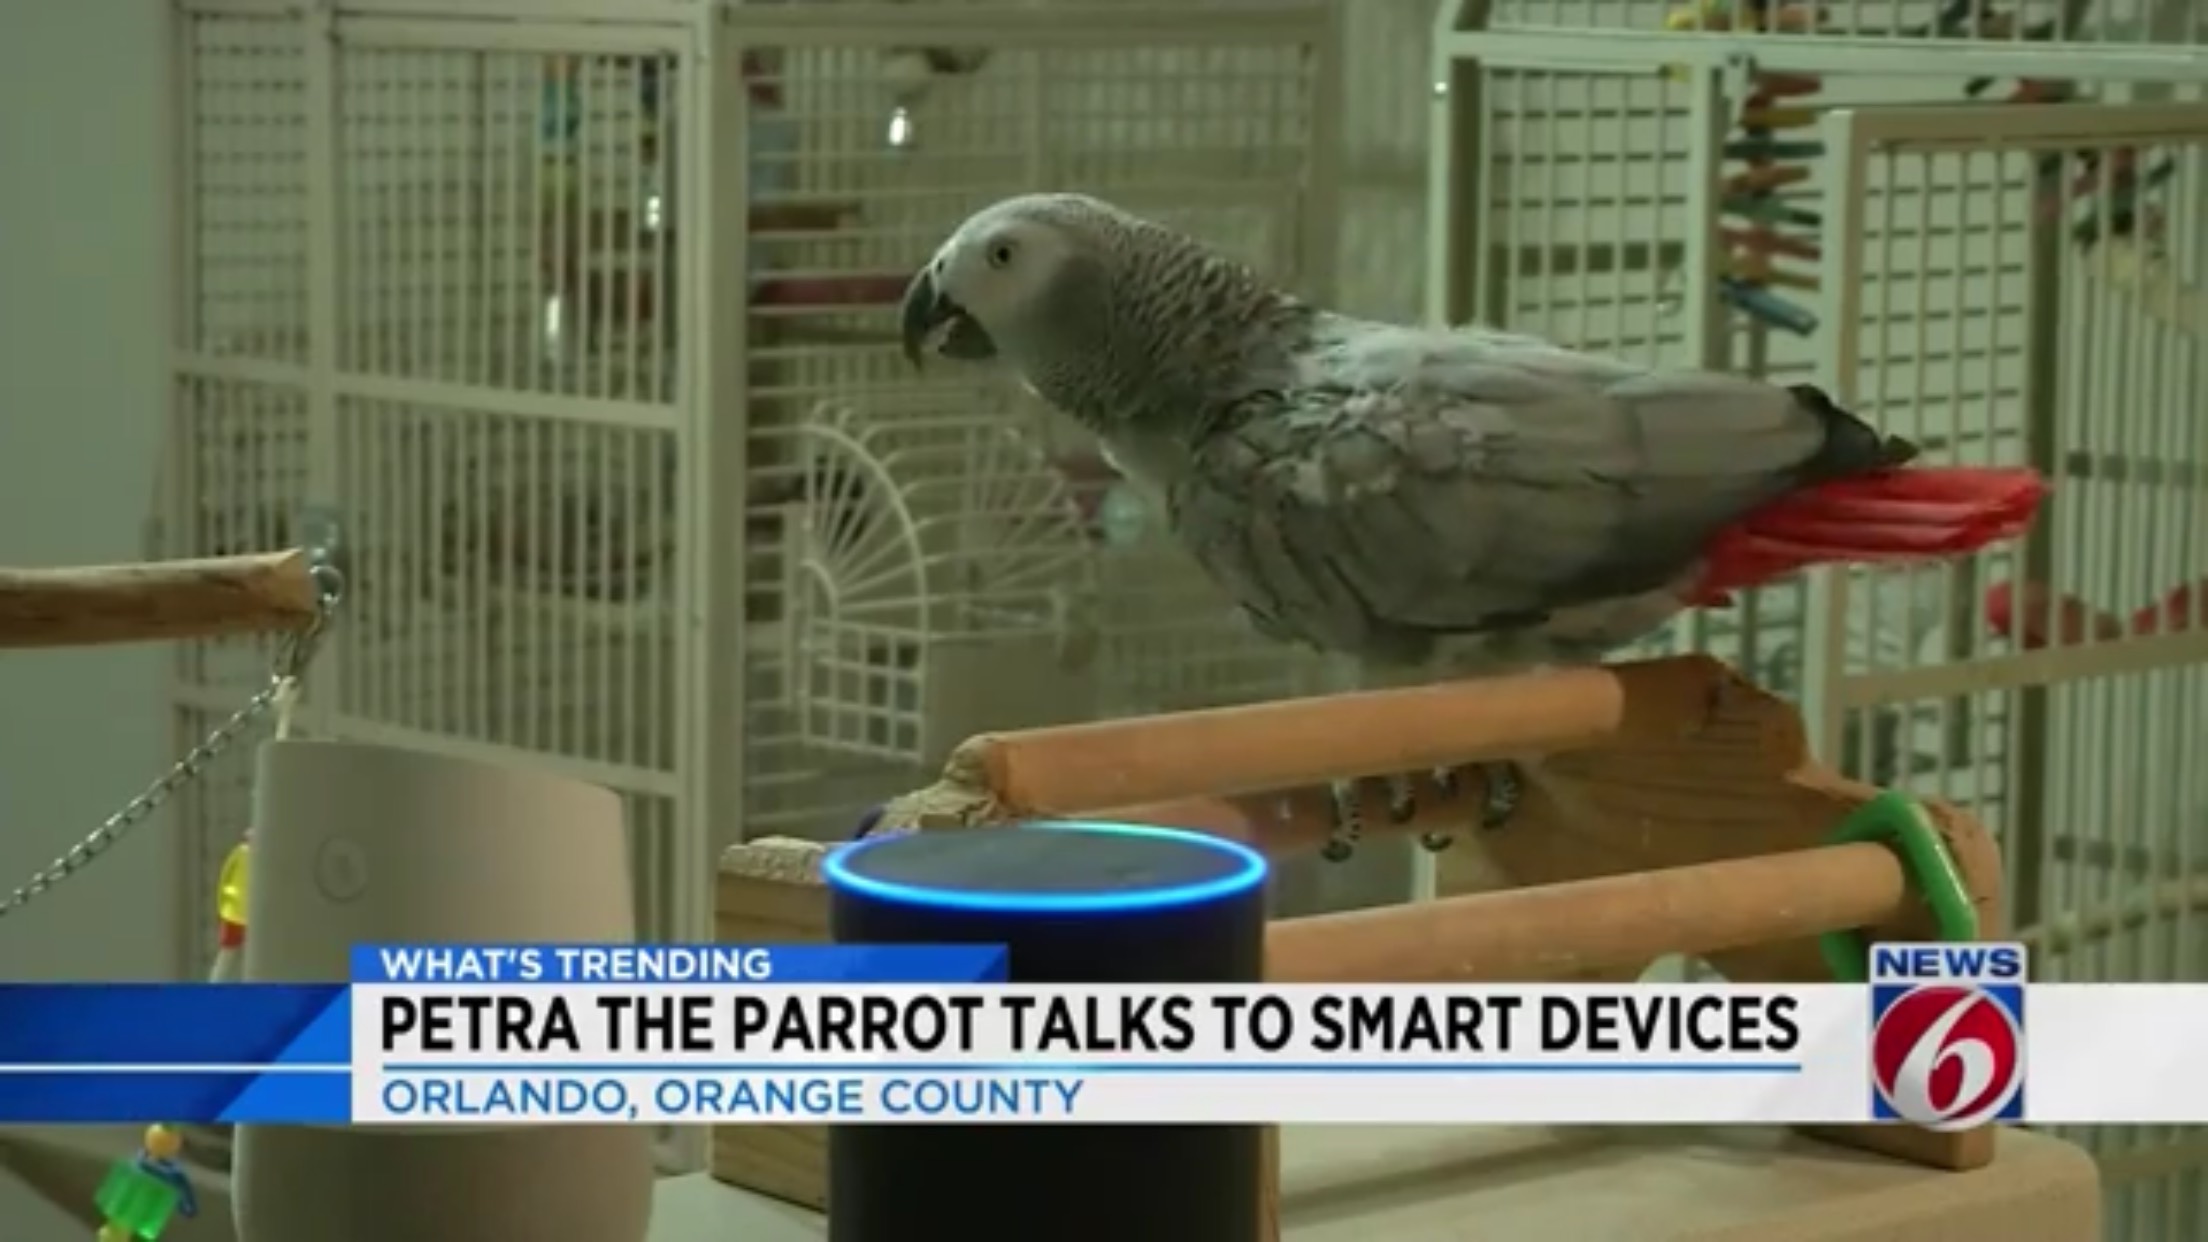 Petra The Parrot Talks To Smart Devices